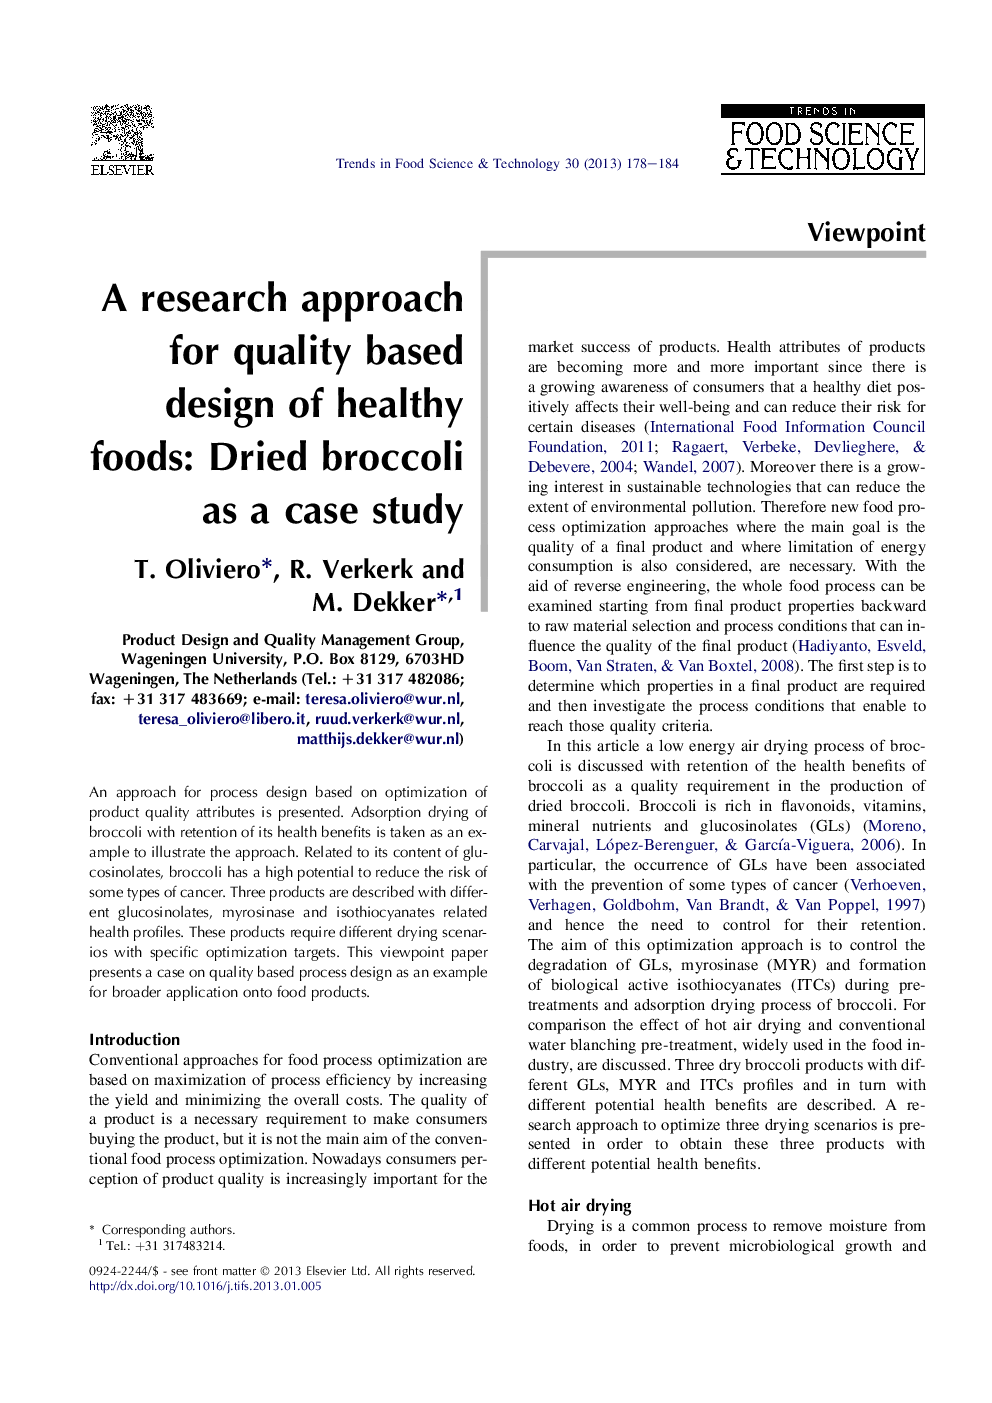 A research approach for quality based design of healthy foods: Dried broccoli as a case study